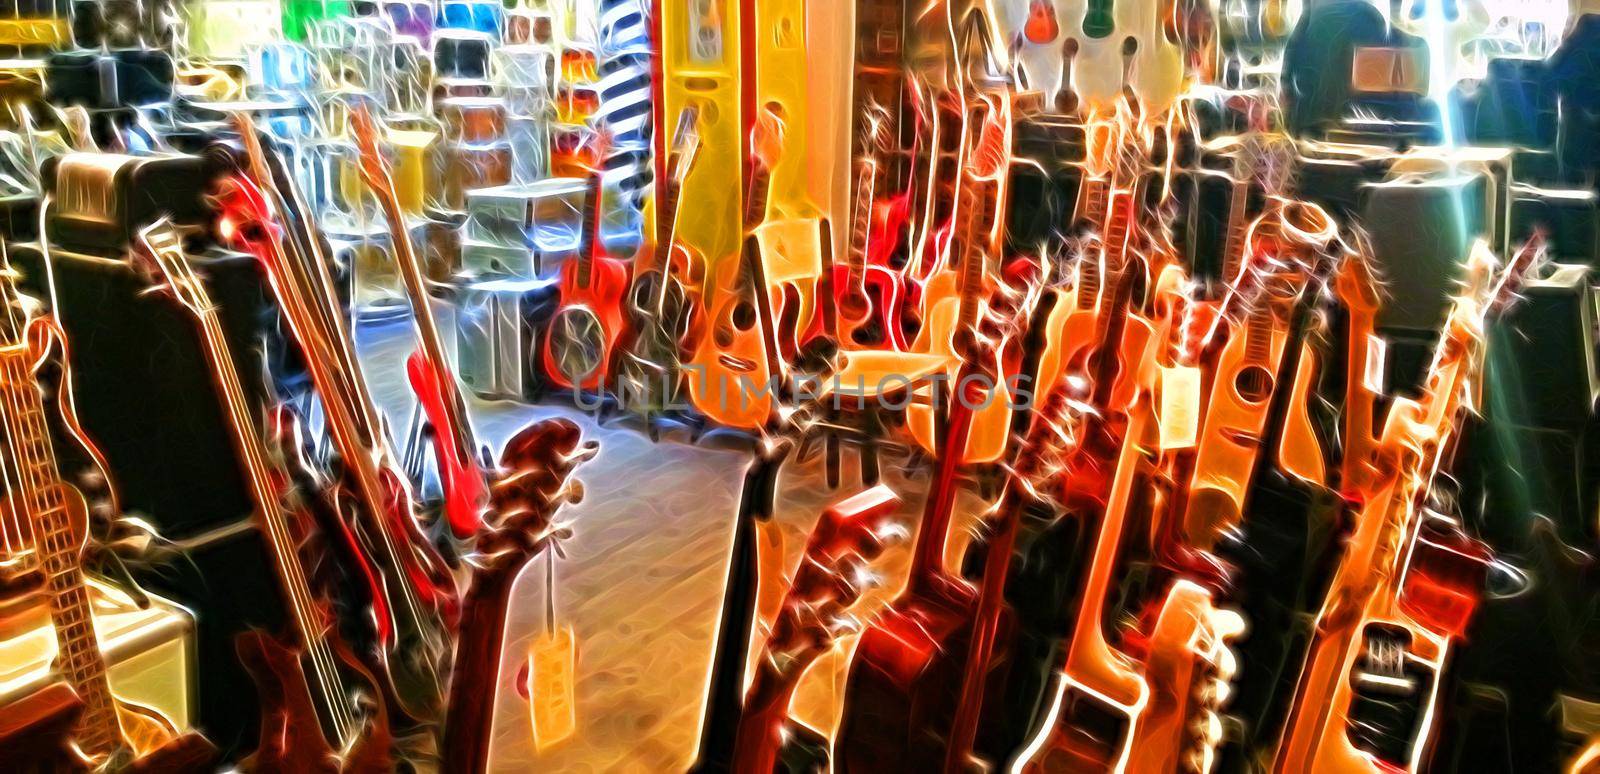 Digital color painting style representing acoustic guitars and electric basses